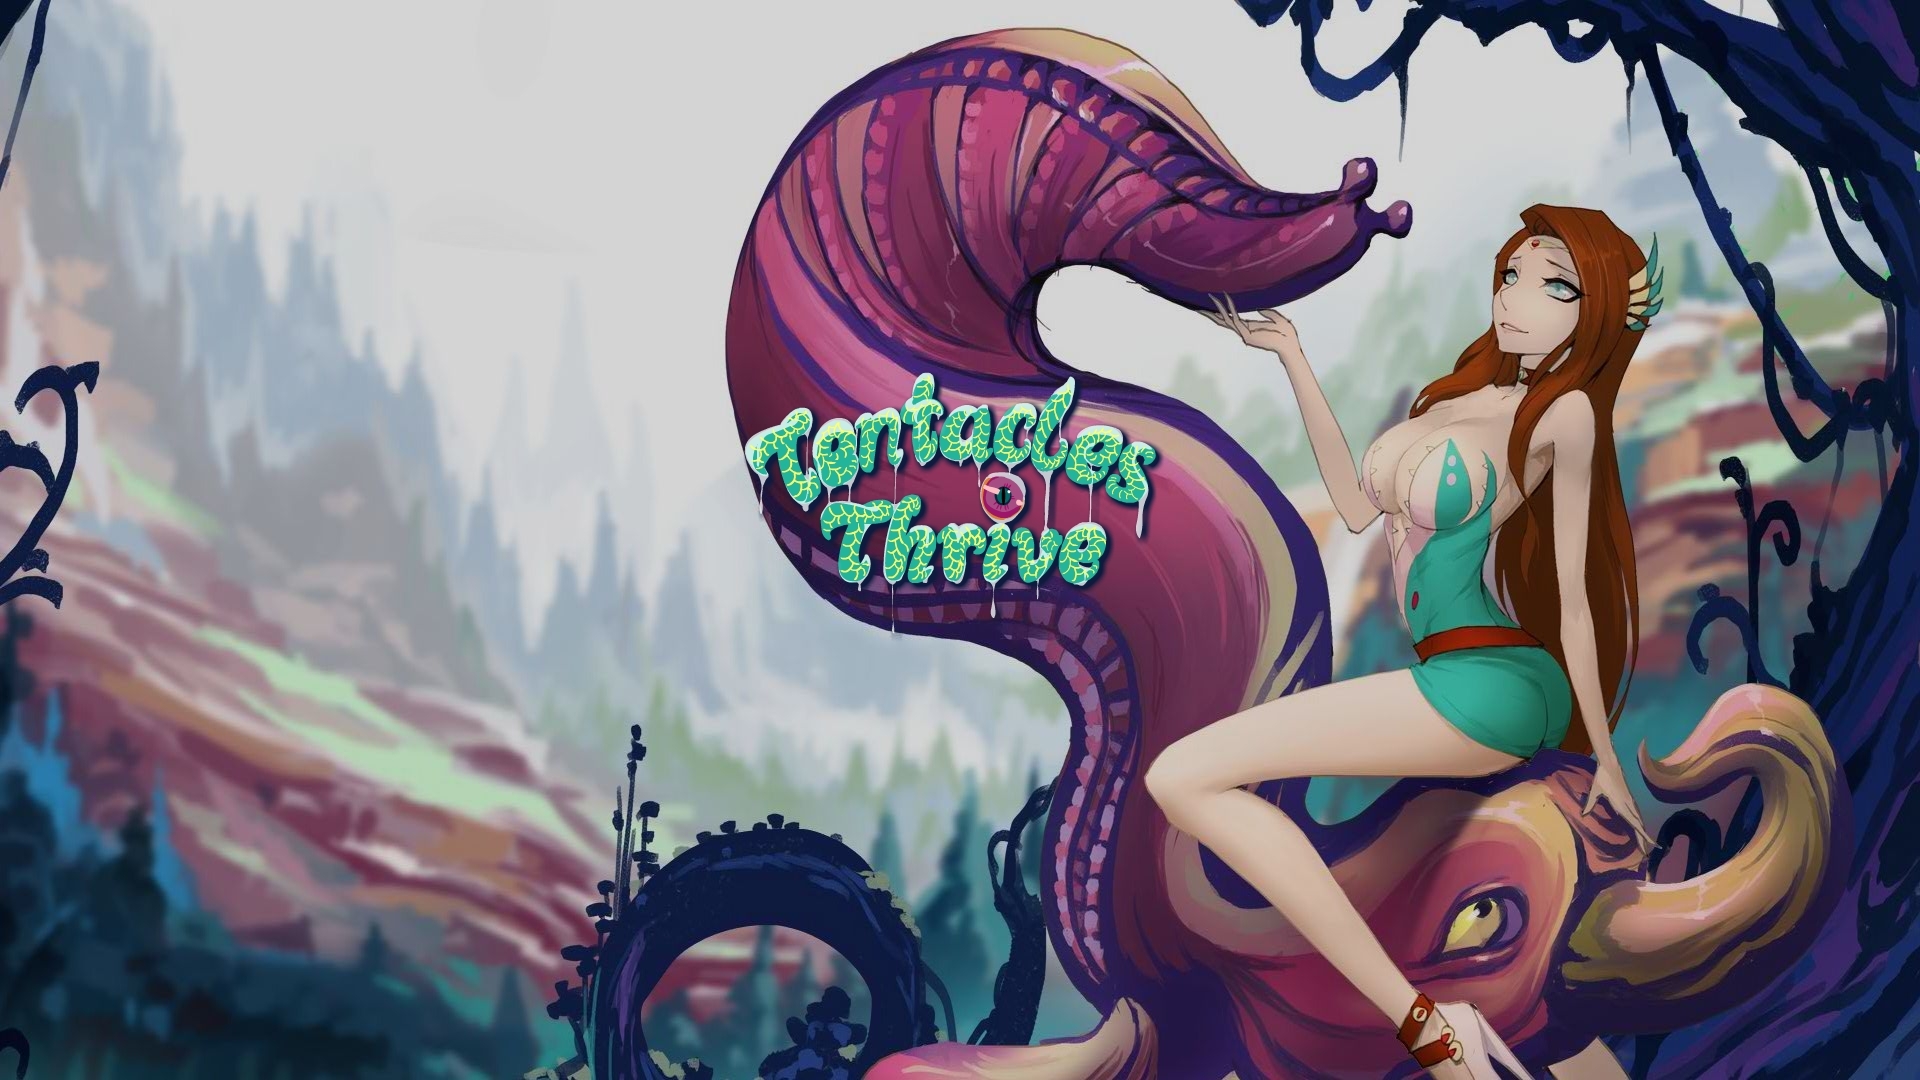 Tentacles thrive porn game